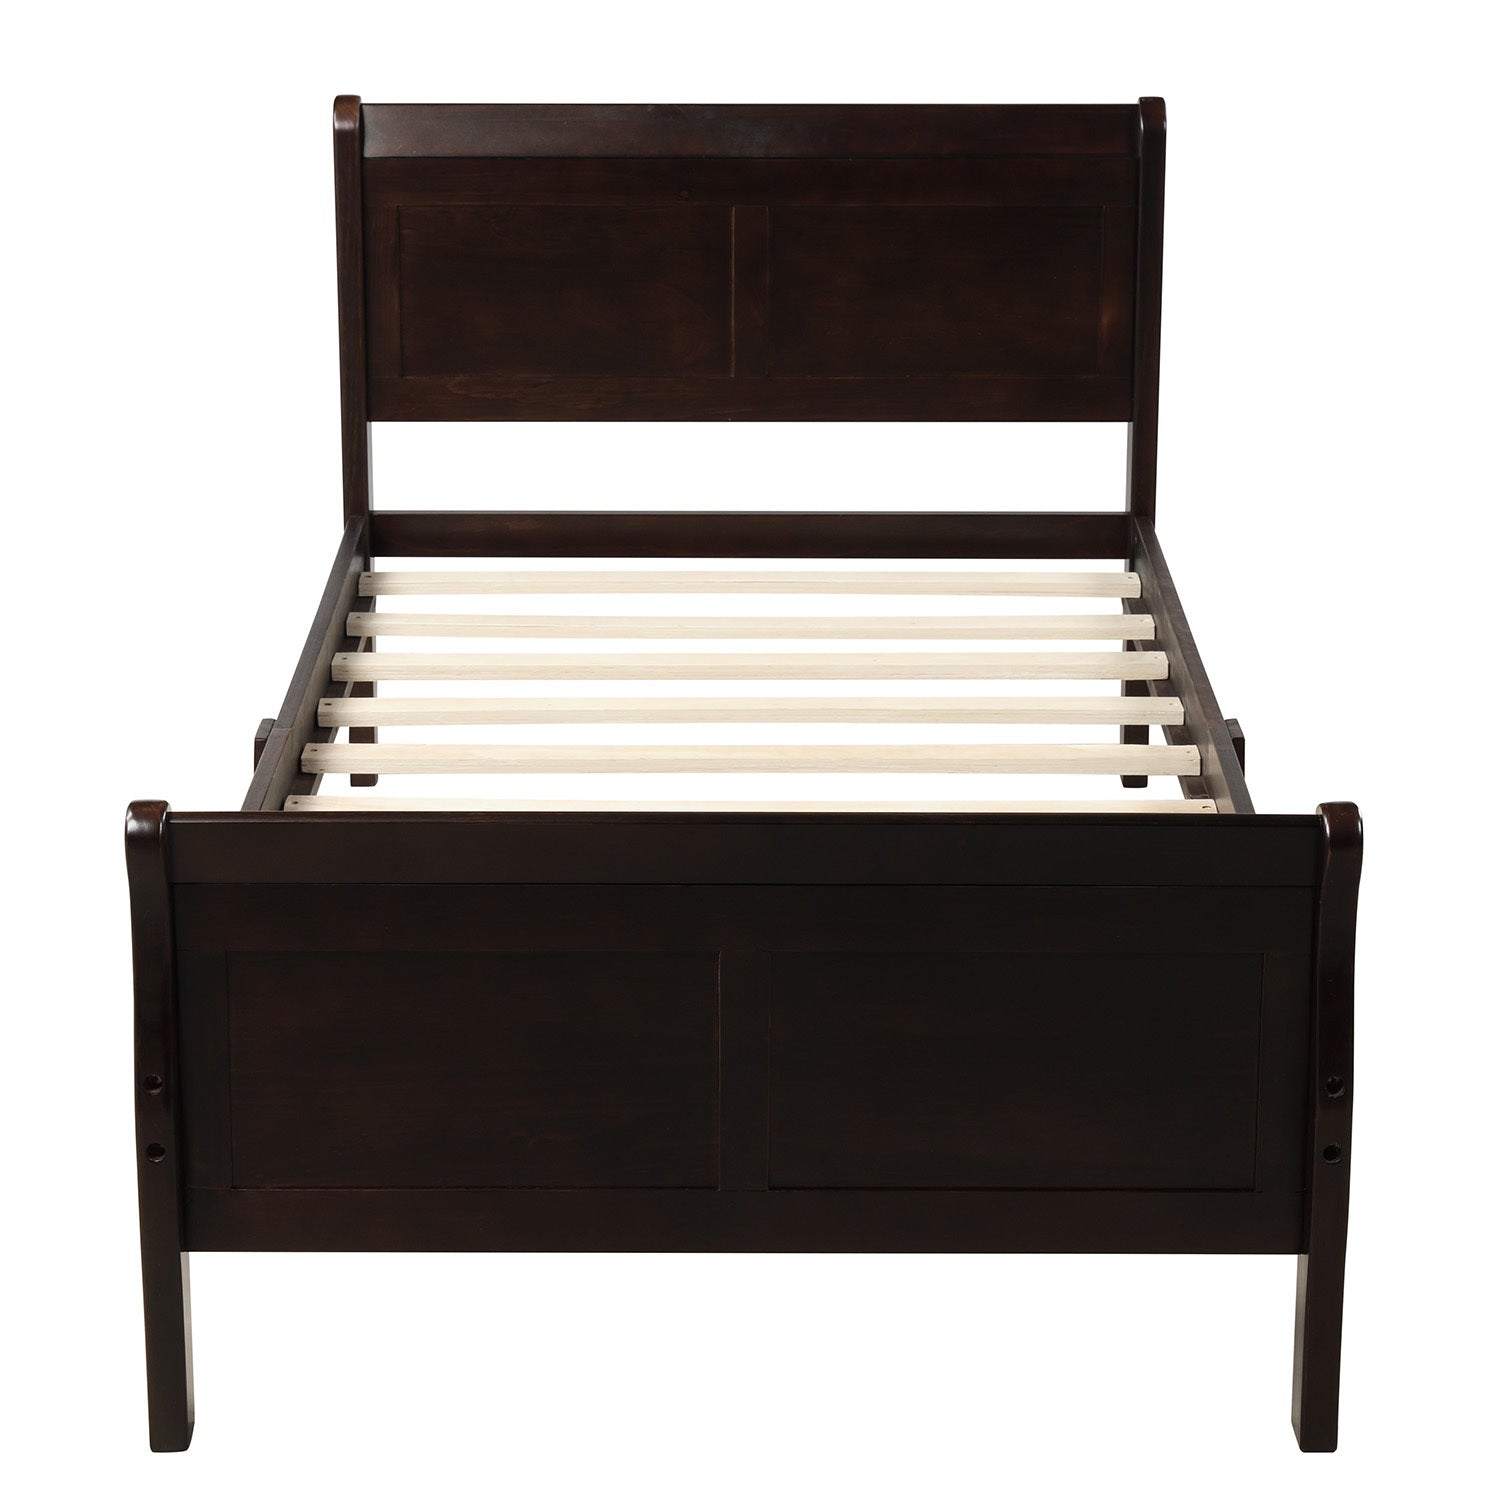 Wood Platform Twin Bed Frame - Sleigh Design with Headboard/Footboard - Sturdy Mattress Foundation with Wood Slat Support